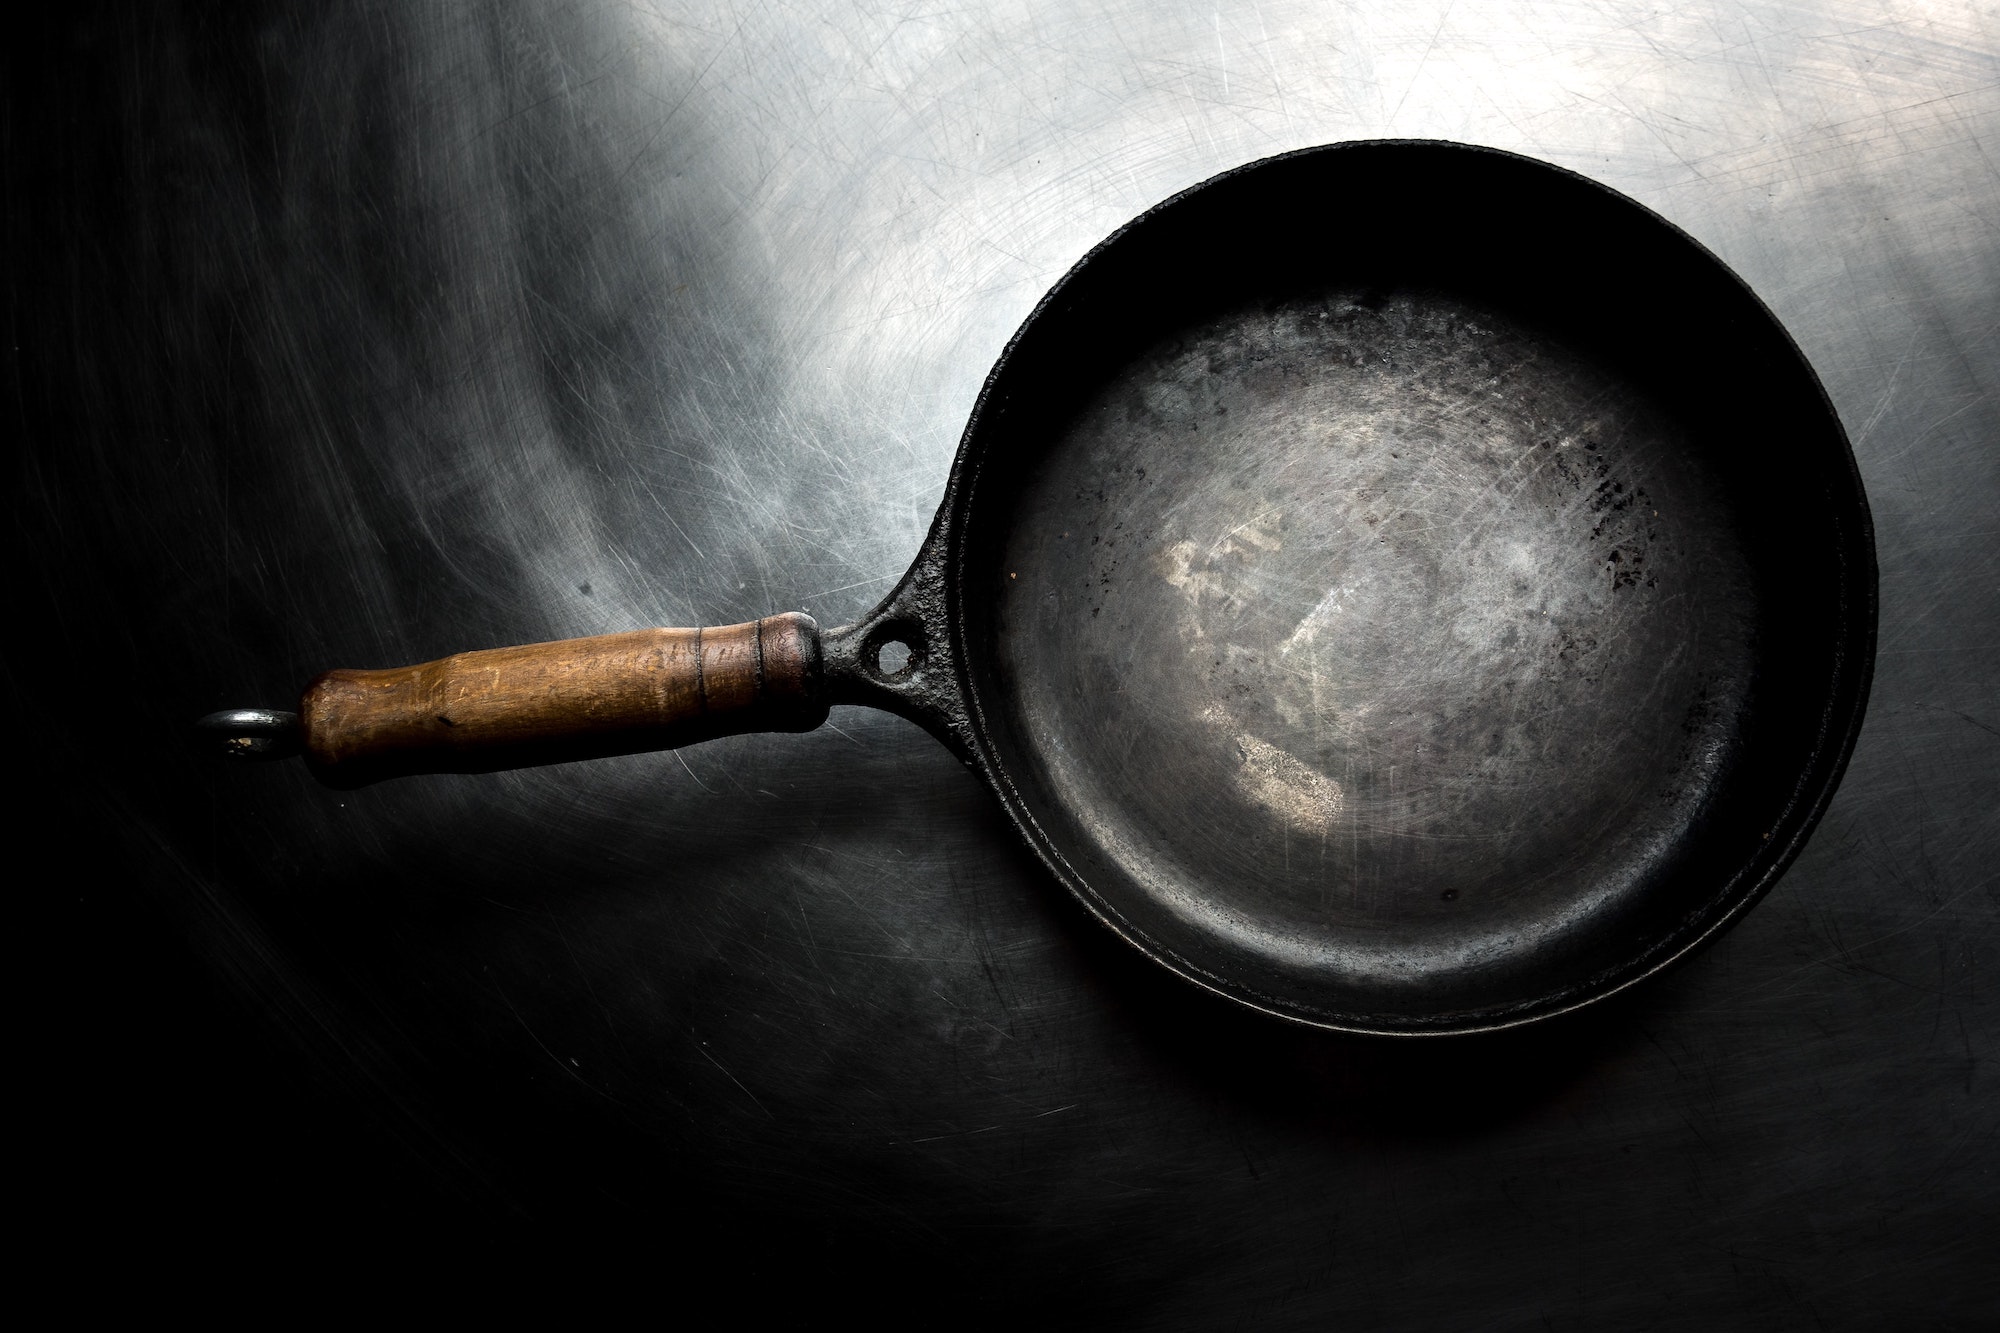 Cast-iron cookware occupies a special place in both professional and home kitchens